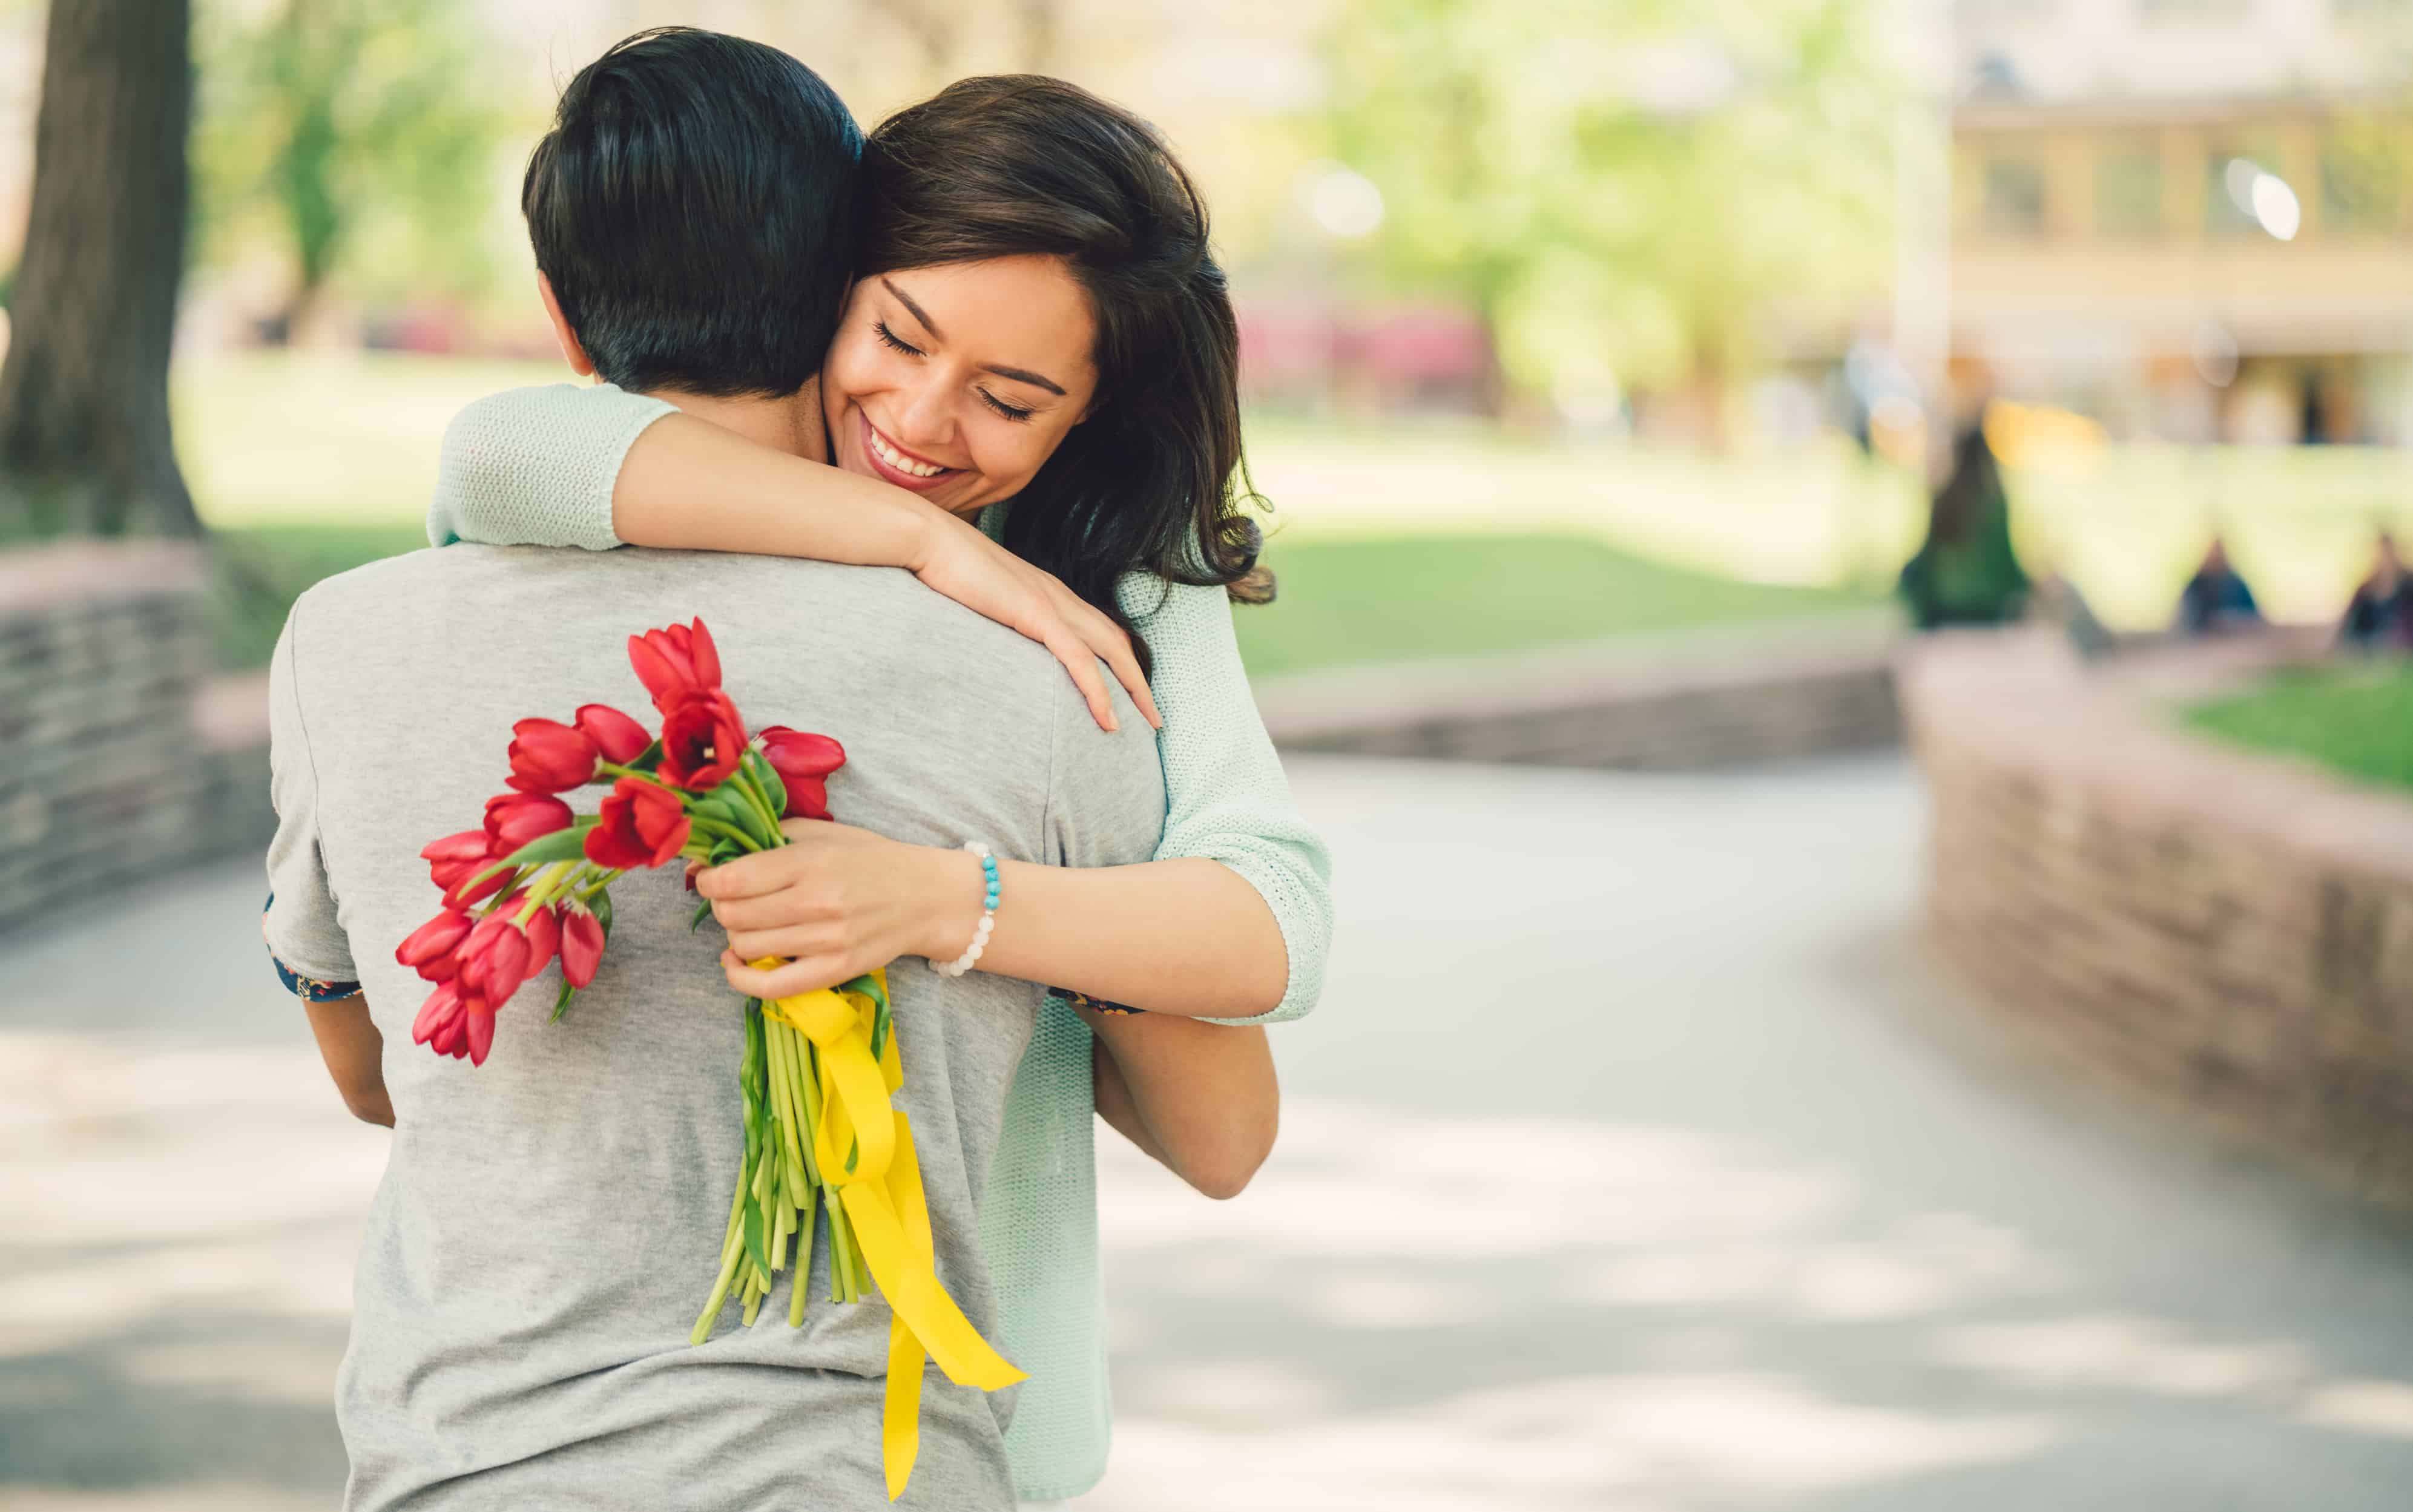 Woman embraces man with flowers in her hand